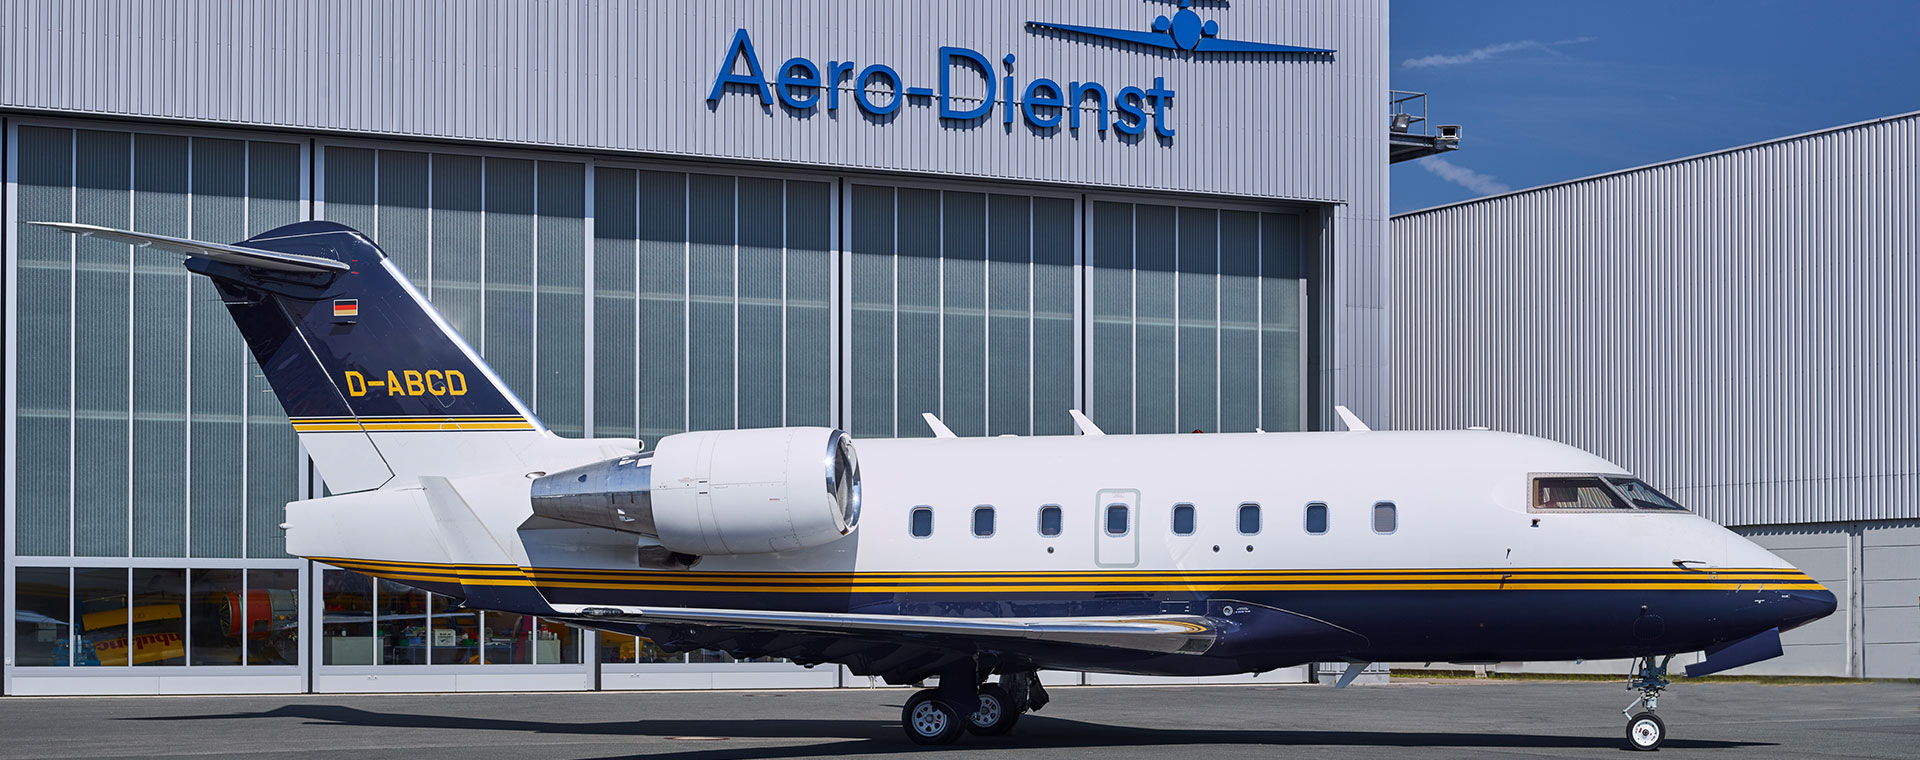 Aero-Dienst Aircraft Sales Current listing CL604 SN 5565